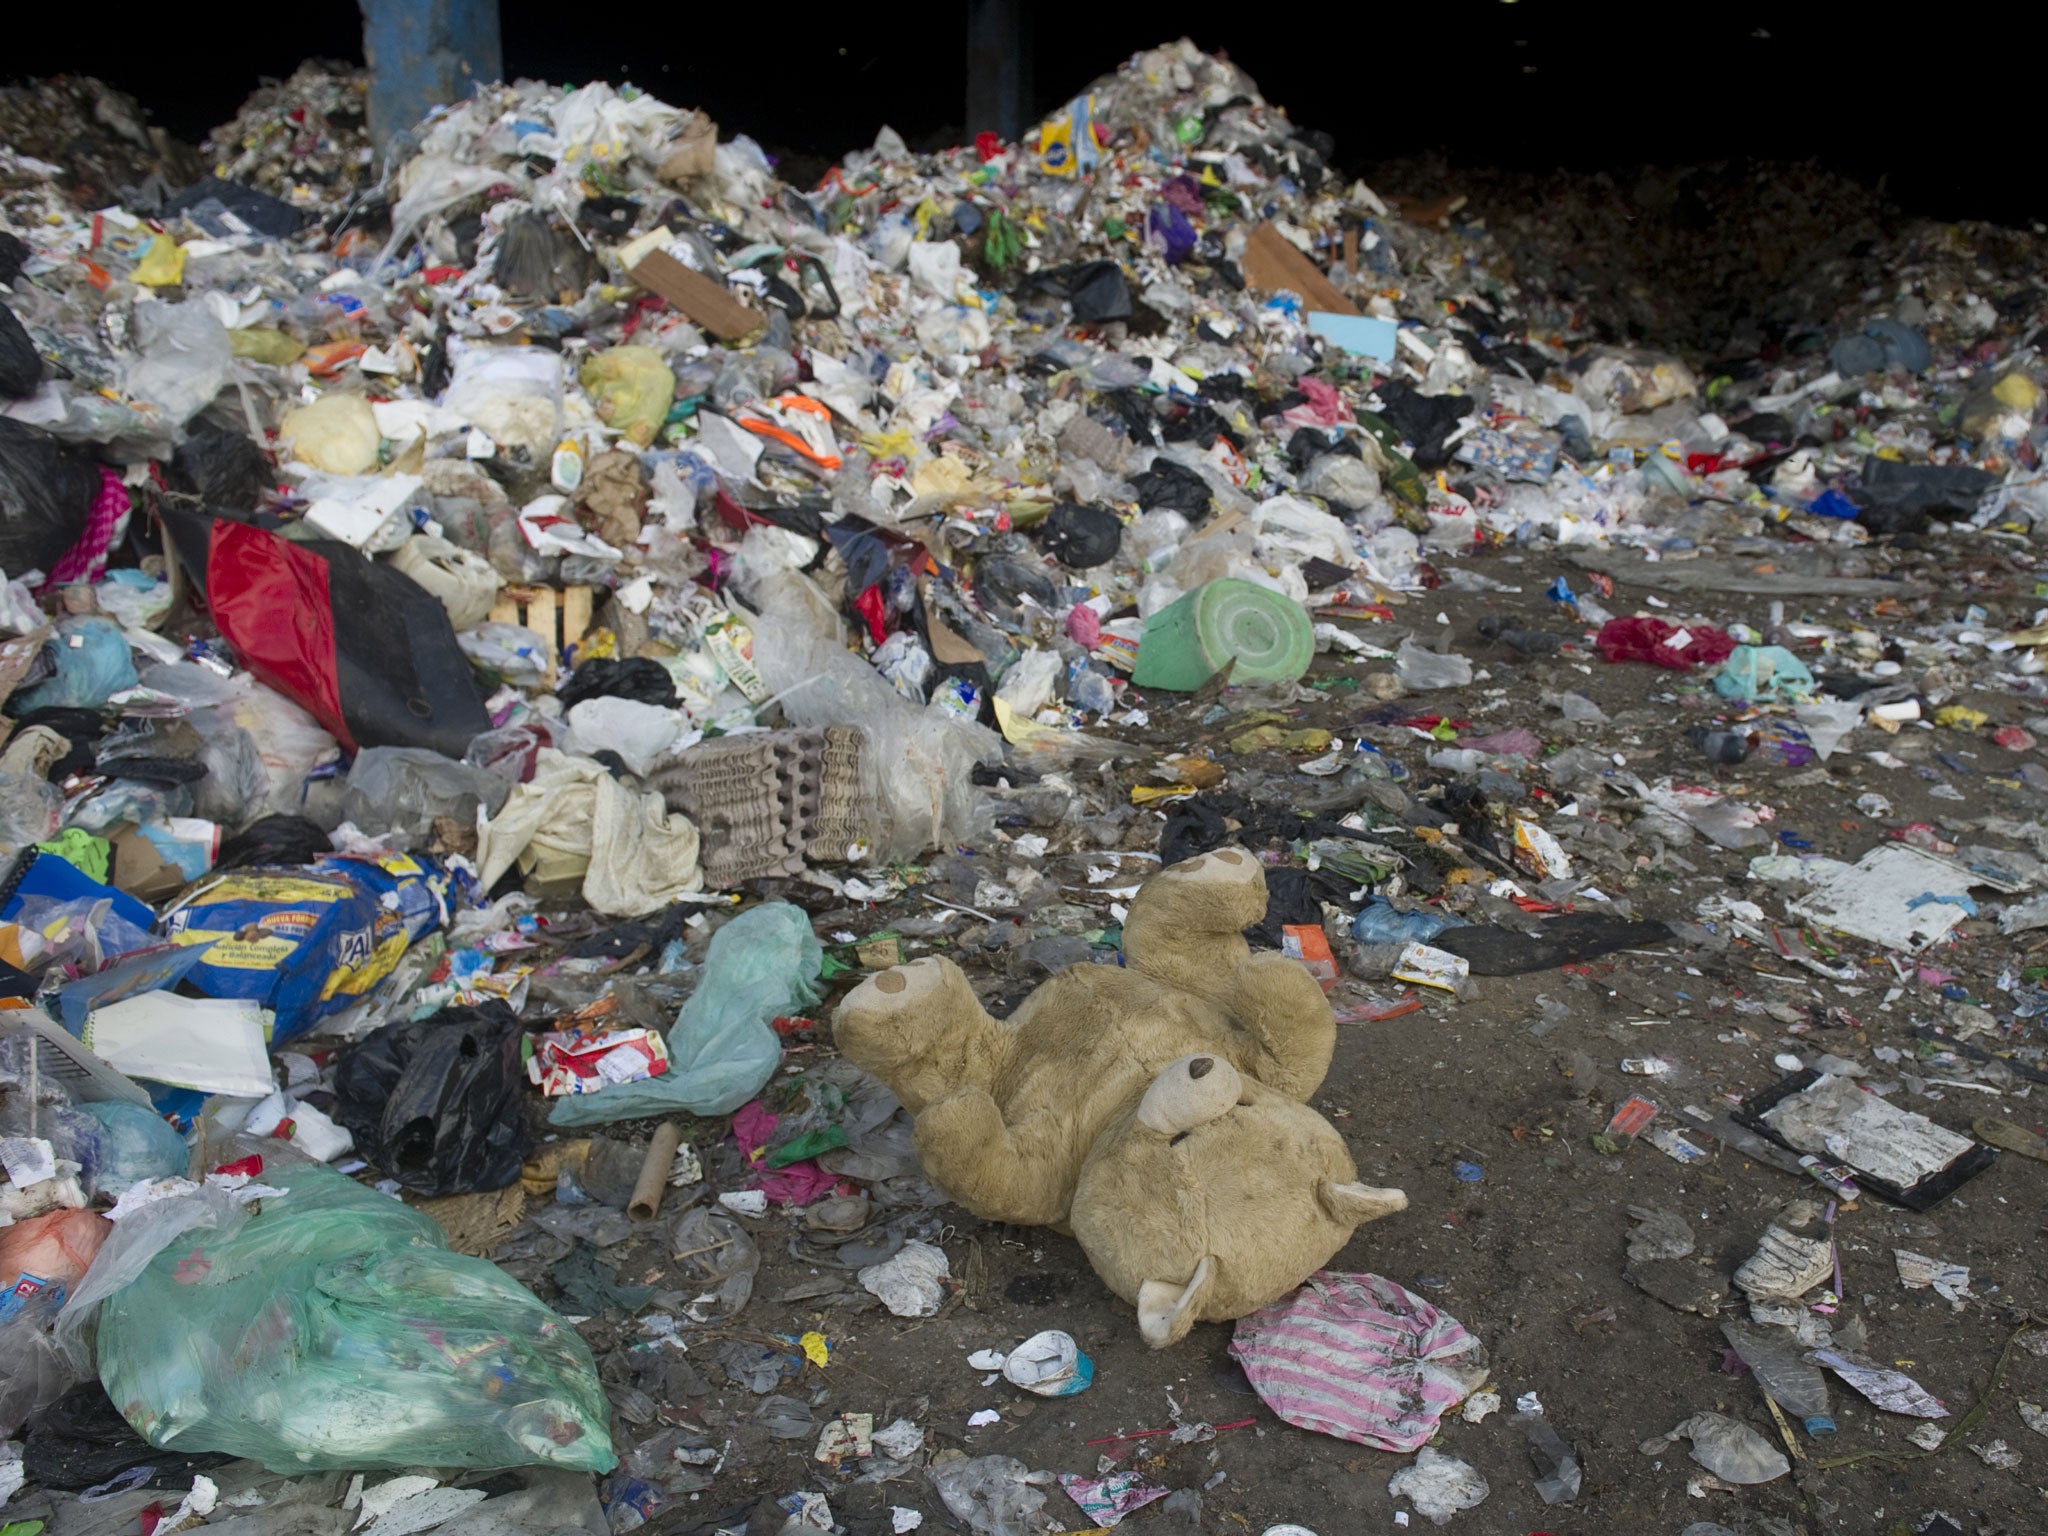 An abandoned teddy bear lies amid the refuse at the 'Bordo Poniente' garbage dump in Mexico City, on January 18, 2012.